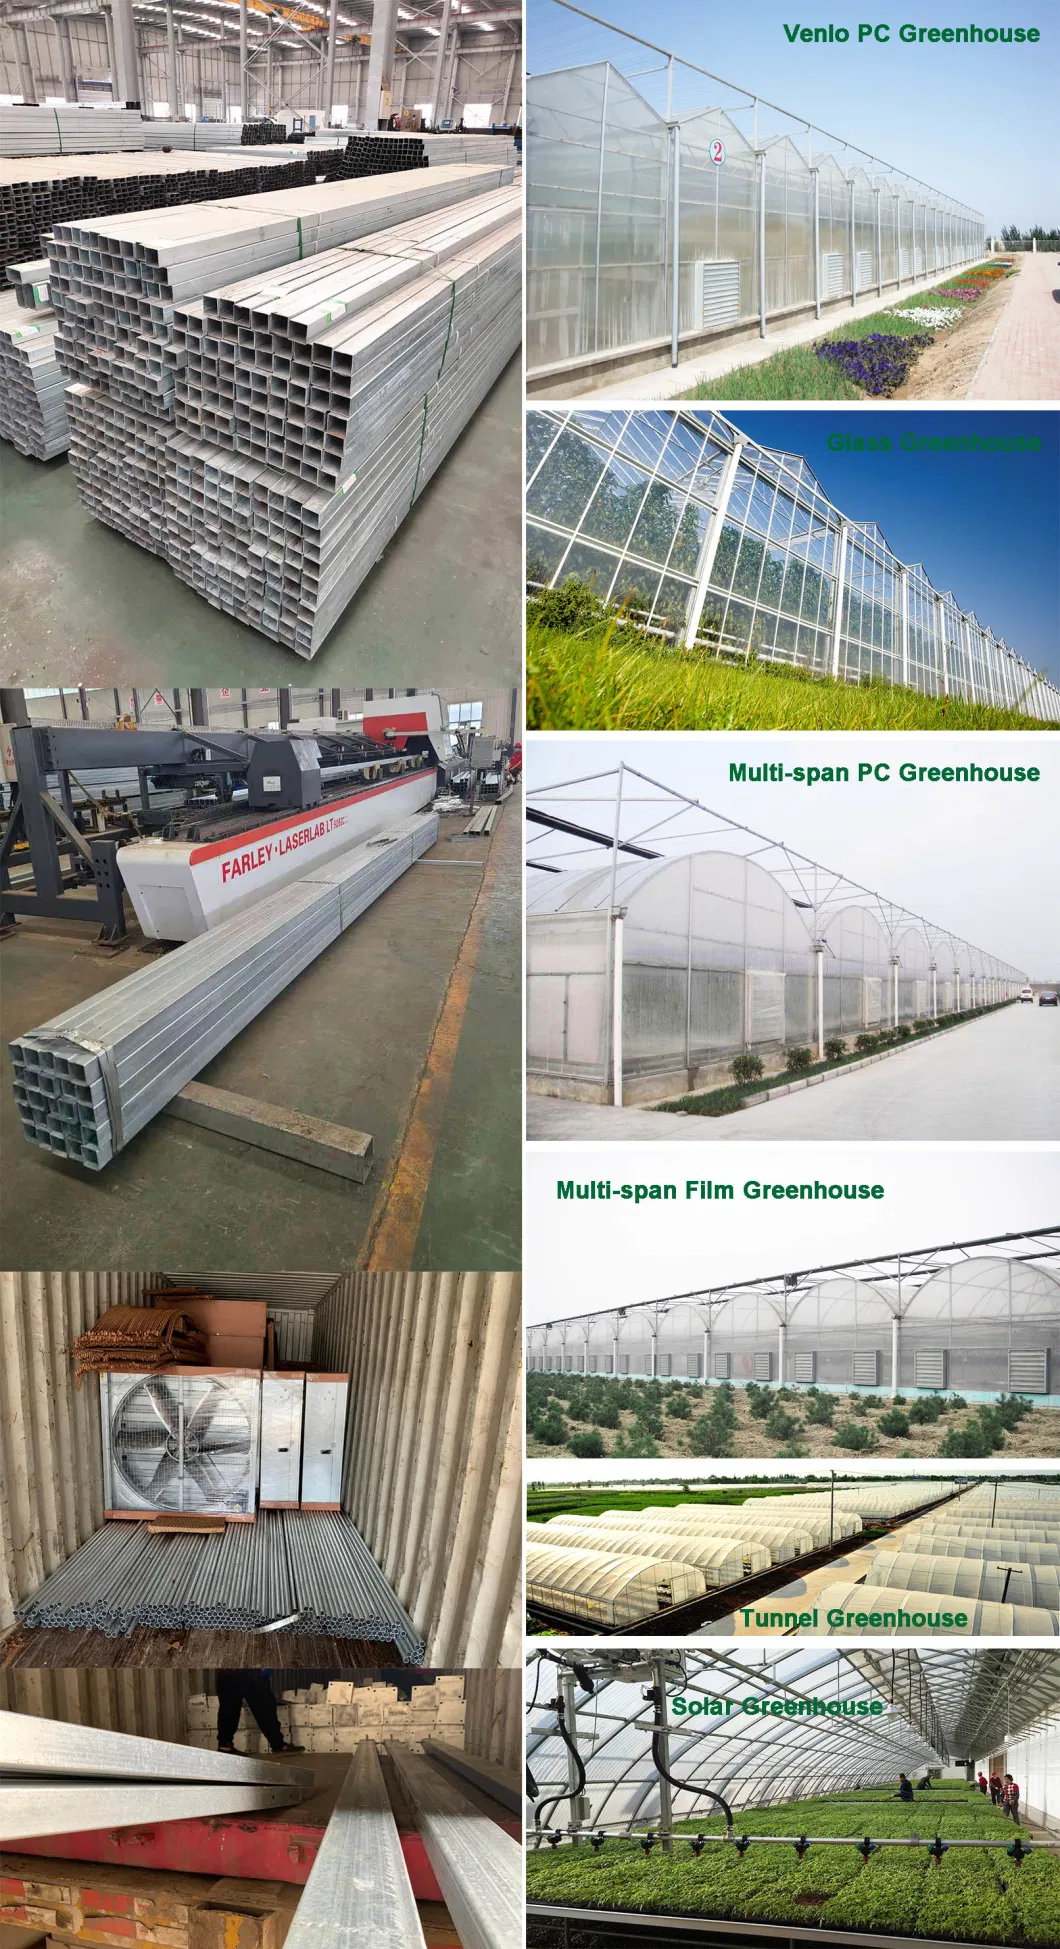 Agricultural Greenhouse Plastic Sheet Covering for Sale